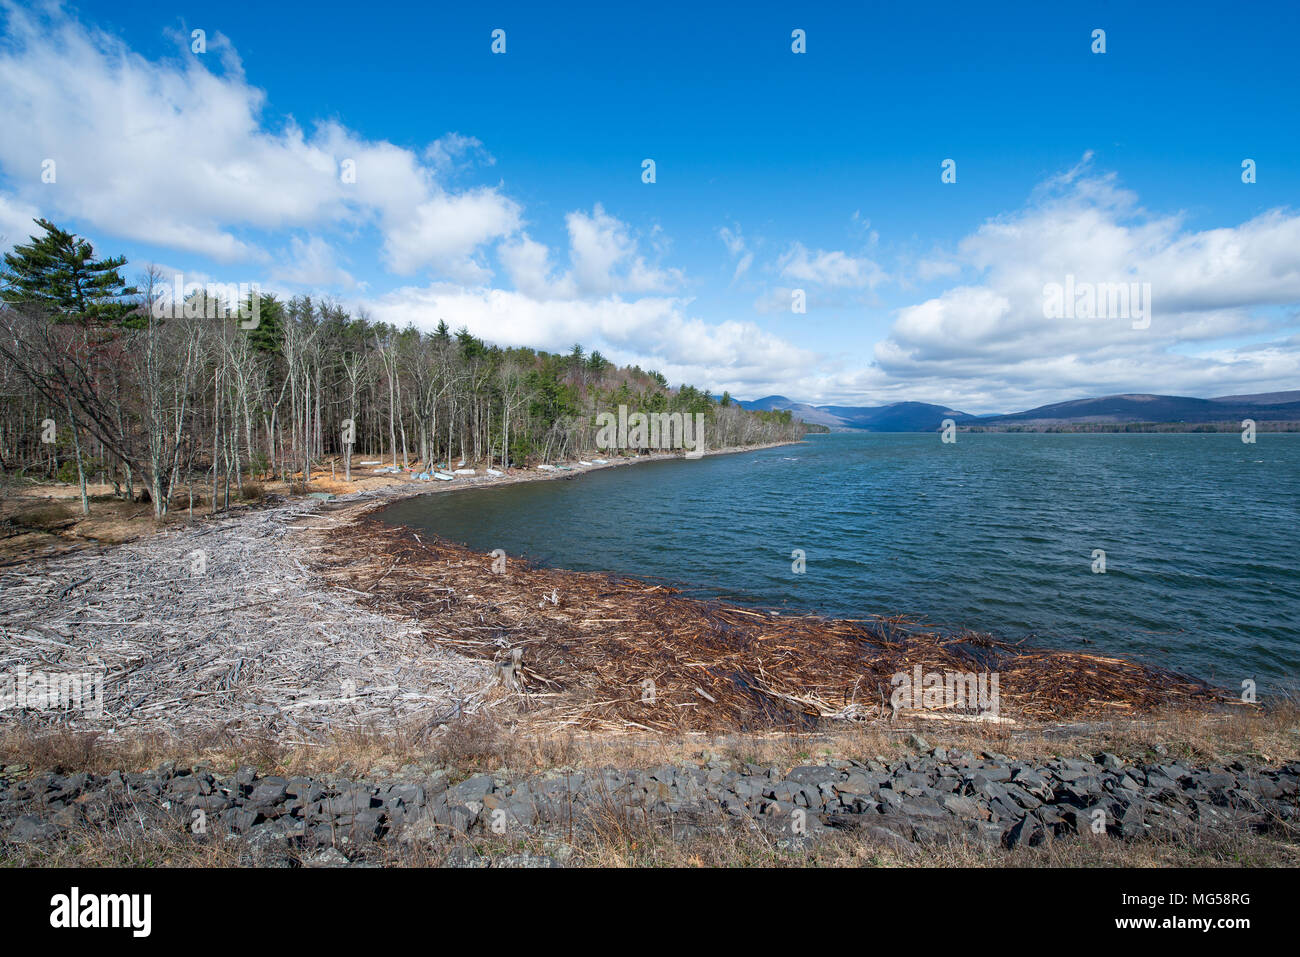 Shoreline and Distant Mountains at the Ashokan Reservoir. Beautiful Spring Morning, Blue Sky with Clouds and accumulated Driftwood and Stone Wall. Stock Photo